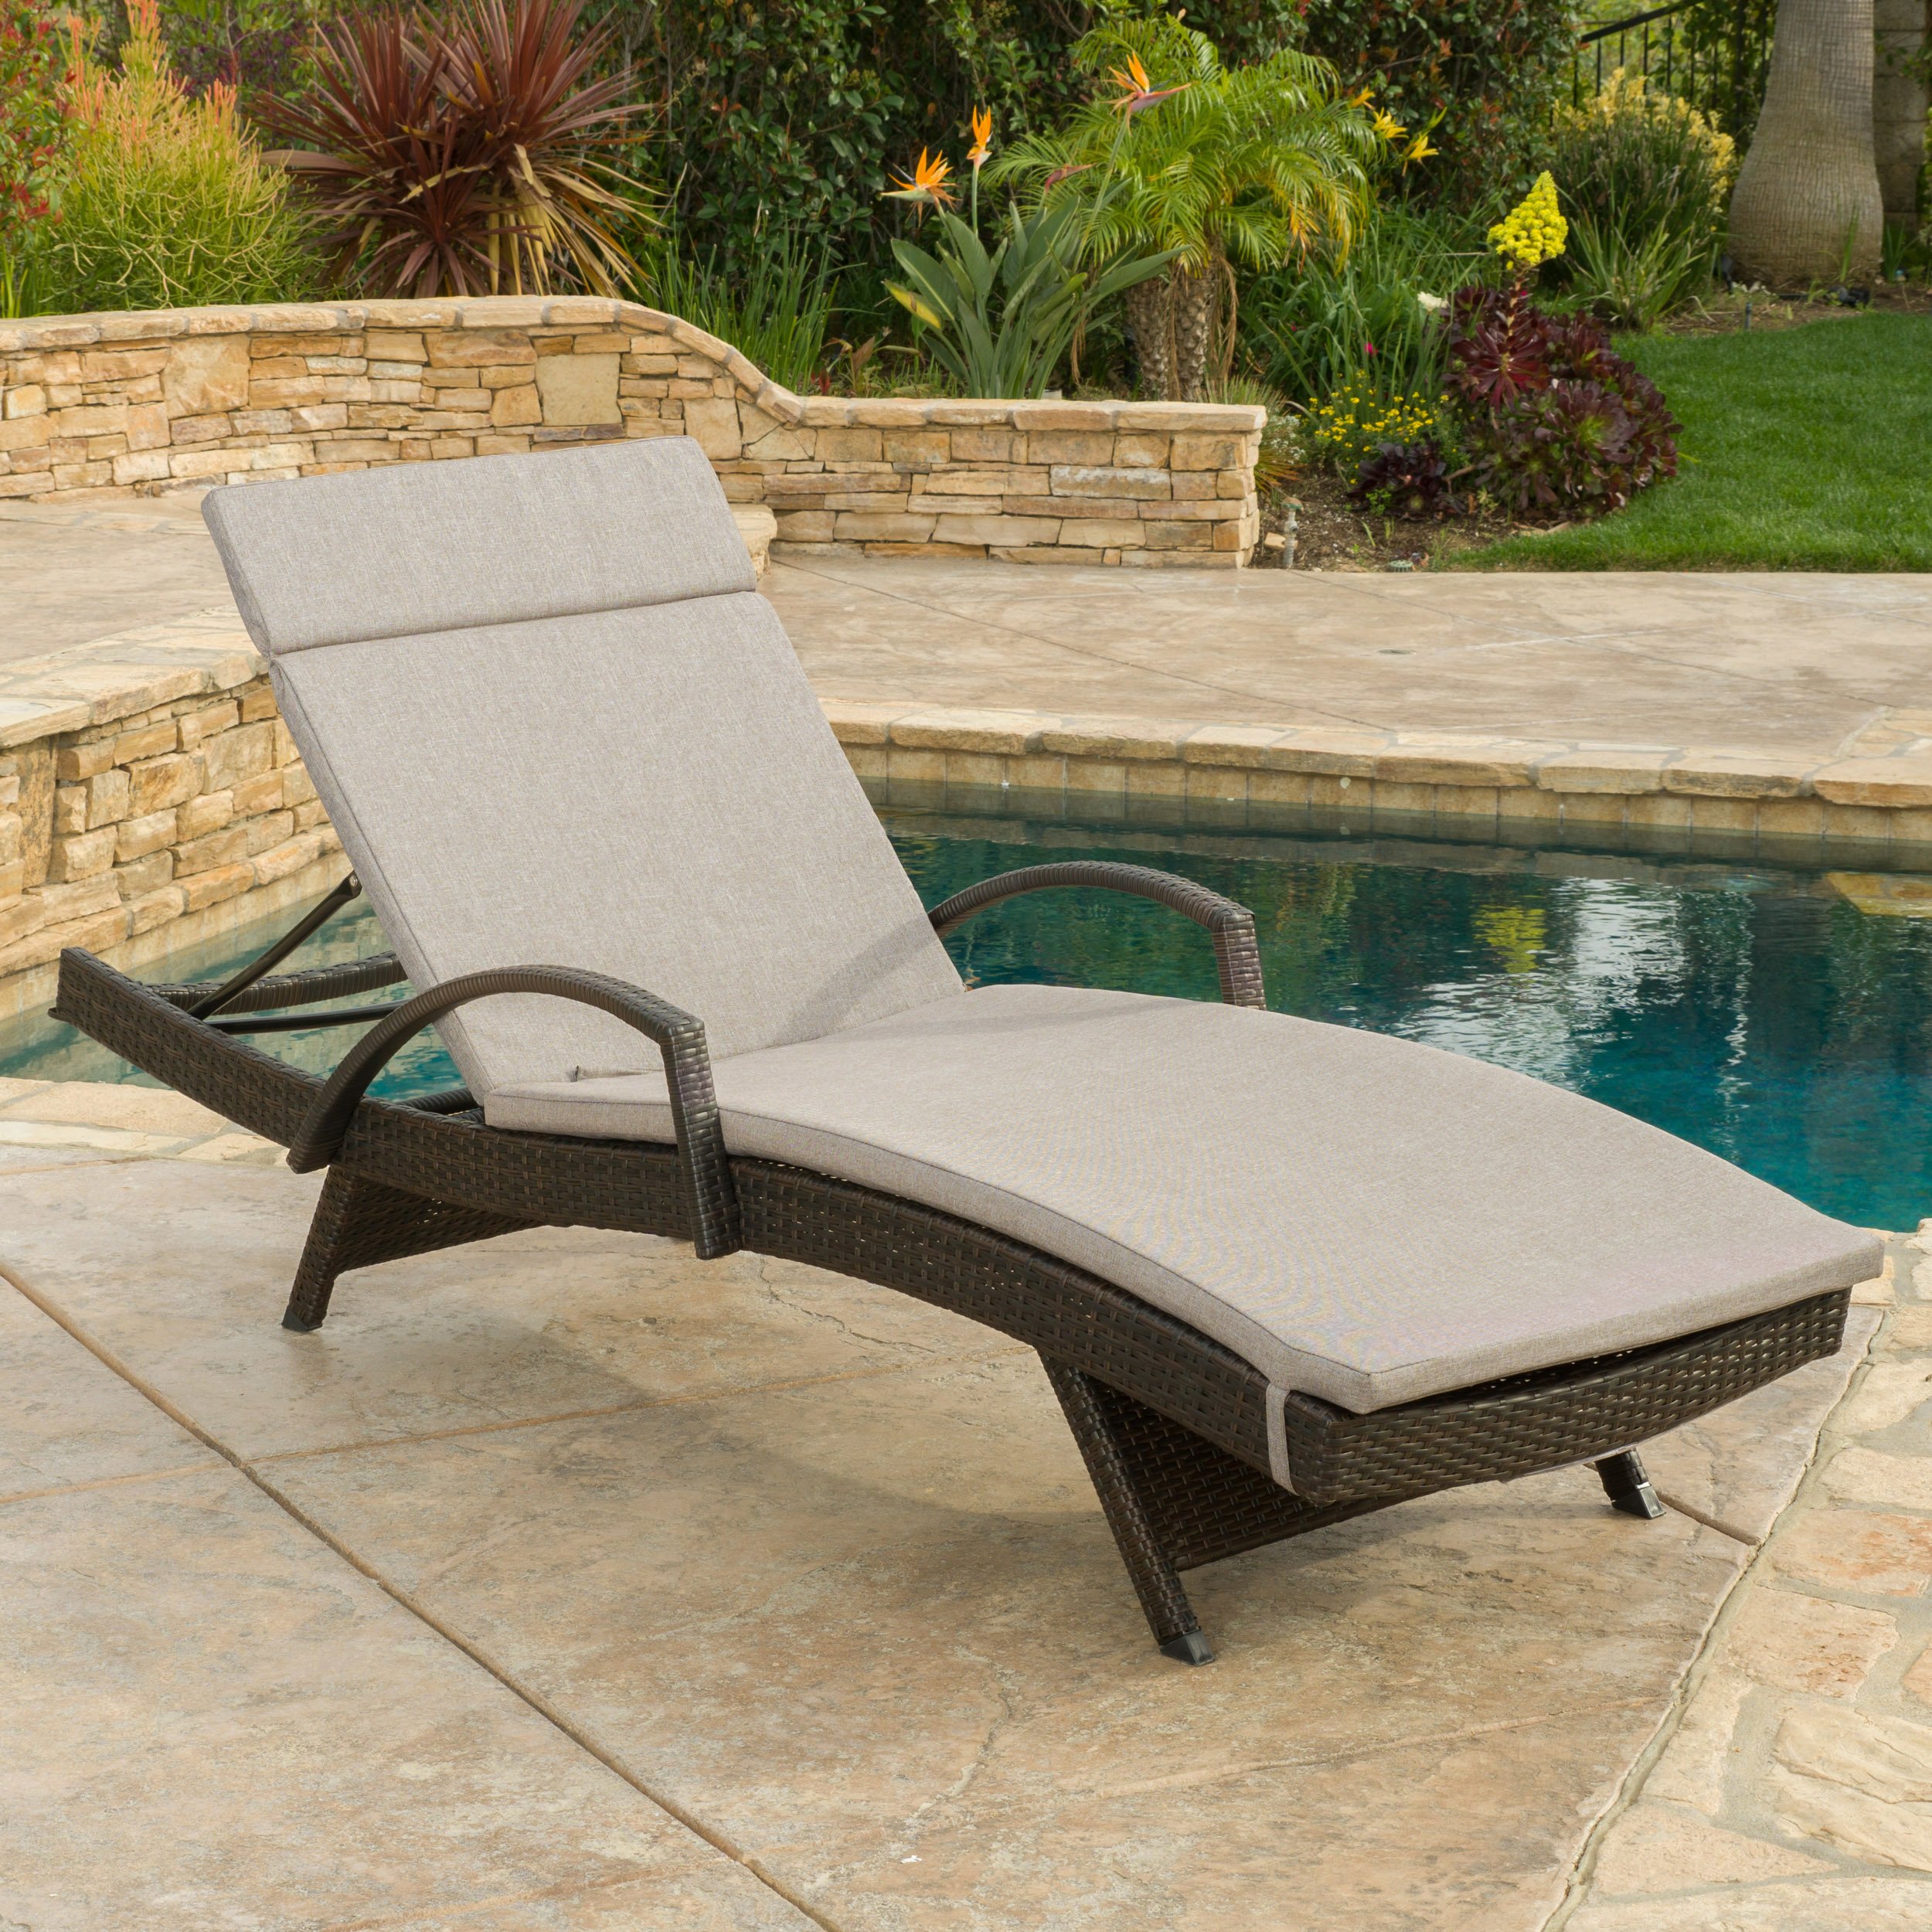 Lakeport Outdoor Adjustable Armed Chaise Lounge Chair With Cushion - Charcoal Cushion